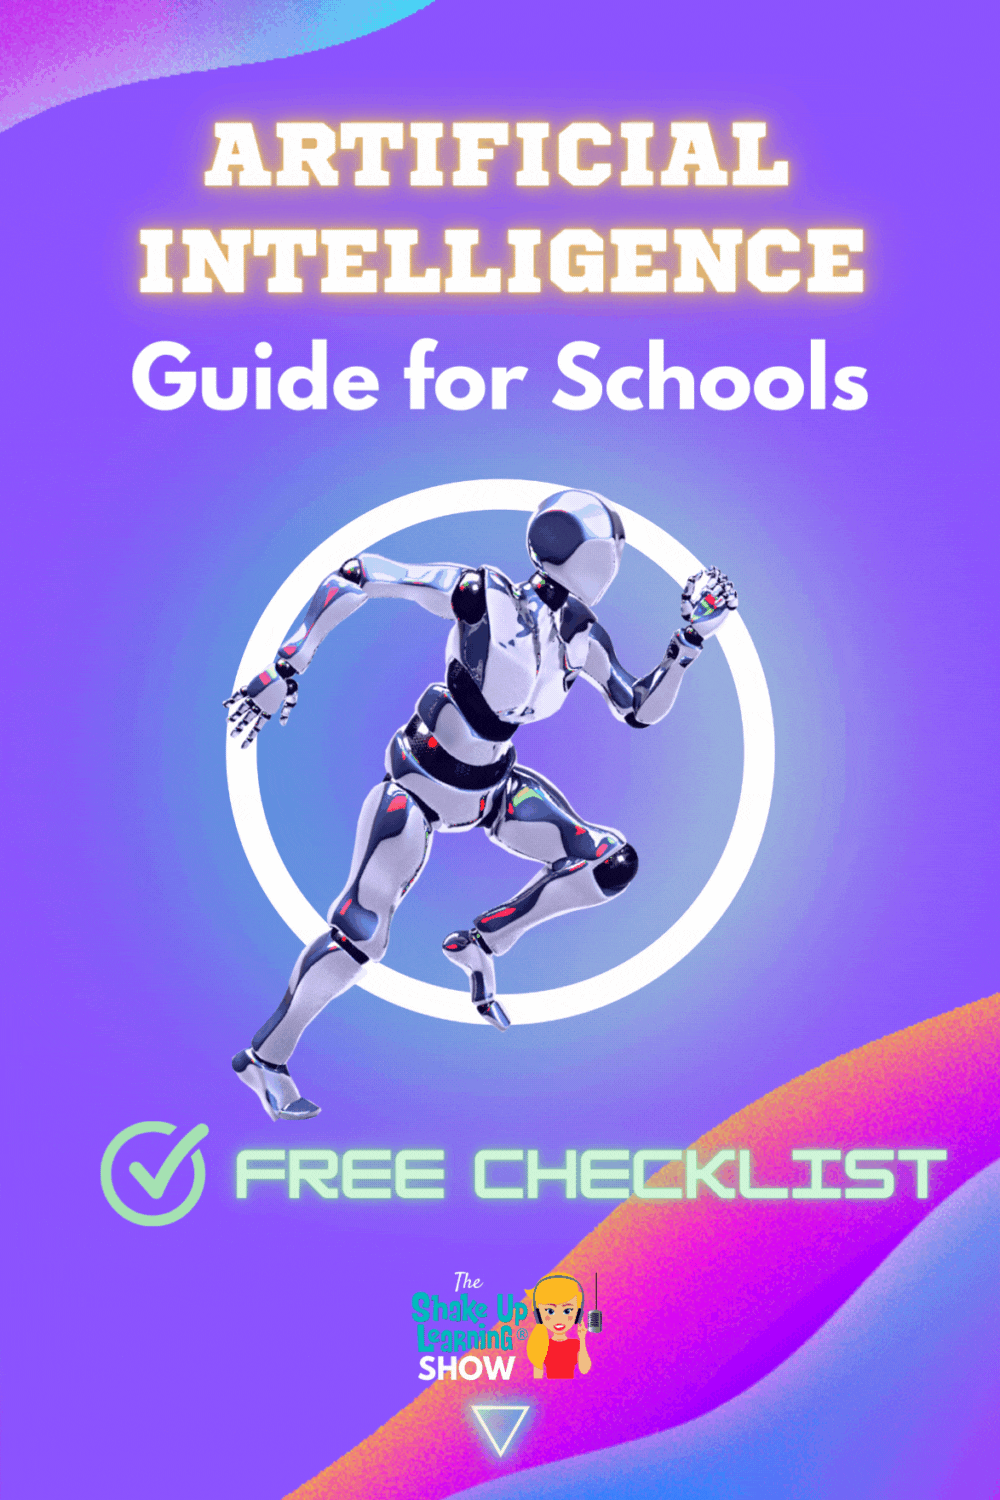 A Comprehensive Guide to Evaluating AI Tools for Classroom Use